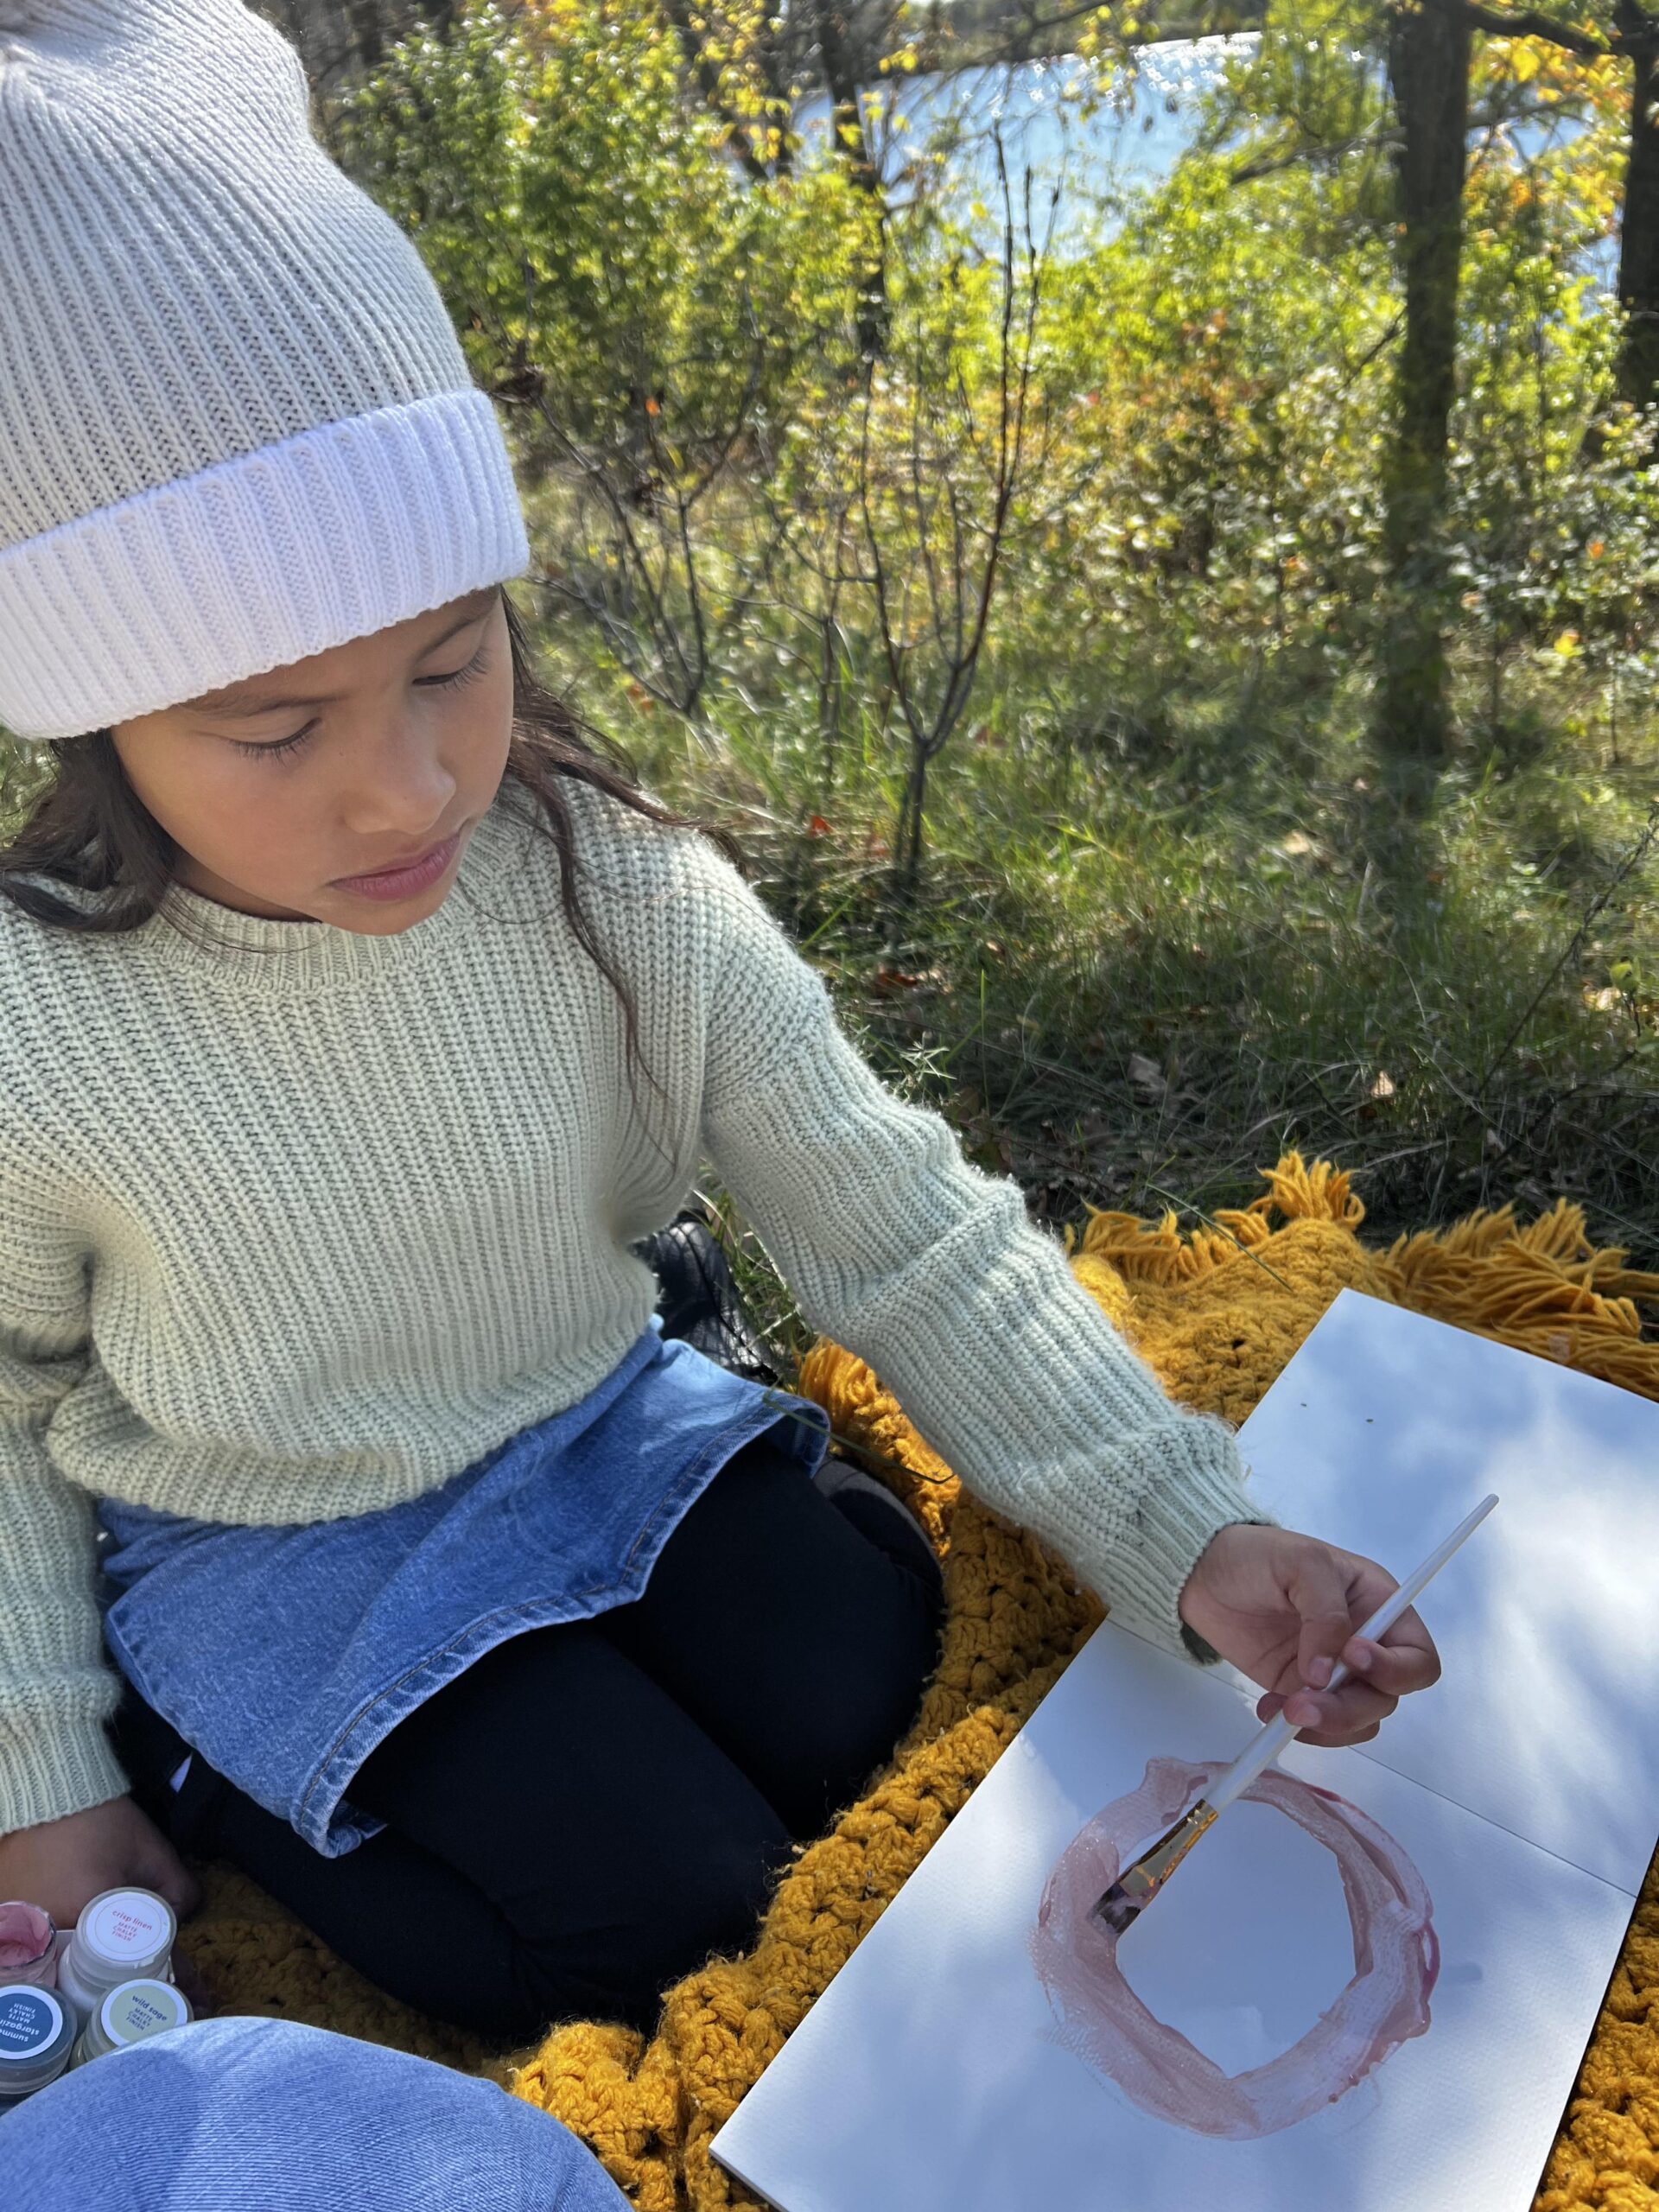 A young girl wearing a sweater, denim skirt, and beanie, painting a circle on a piece of paper.